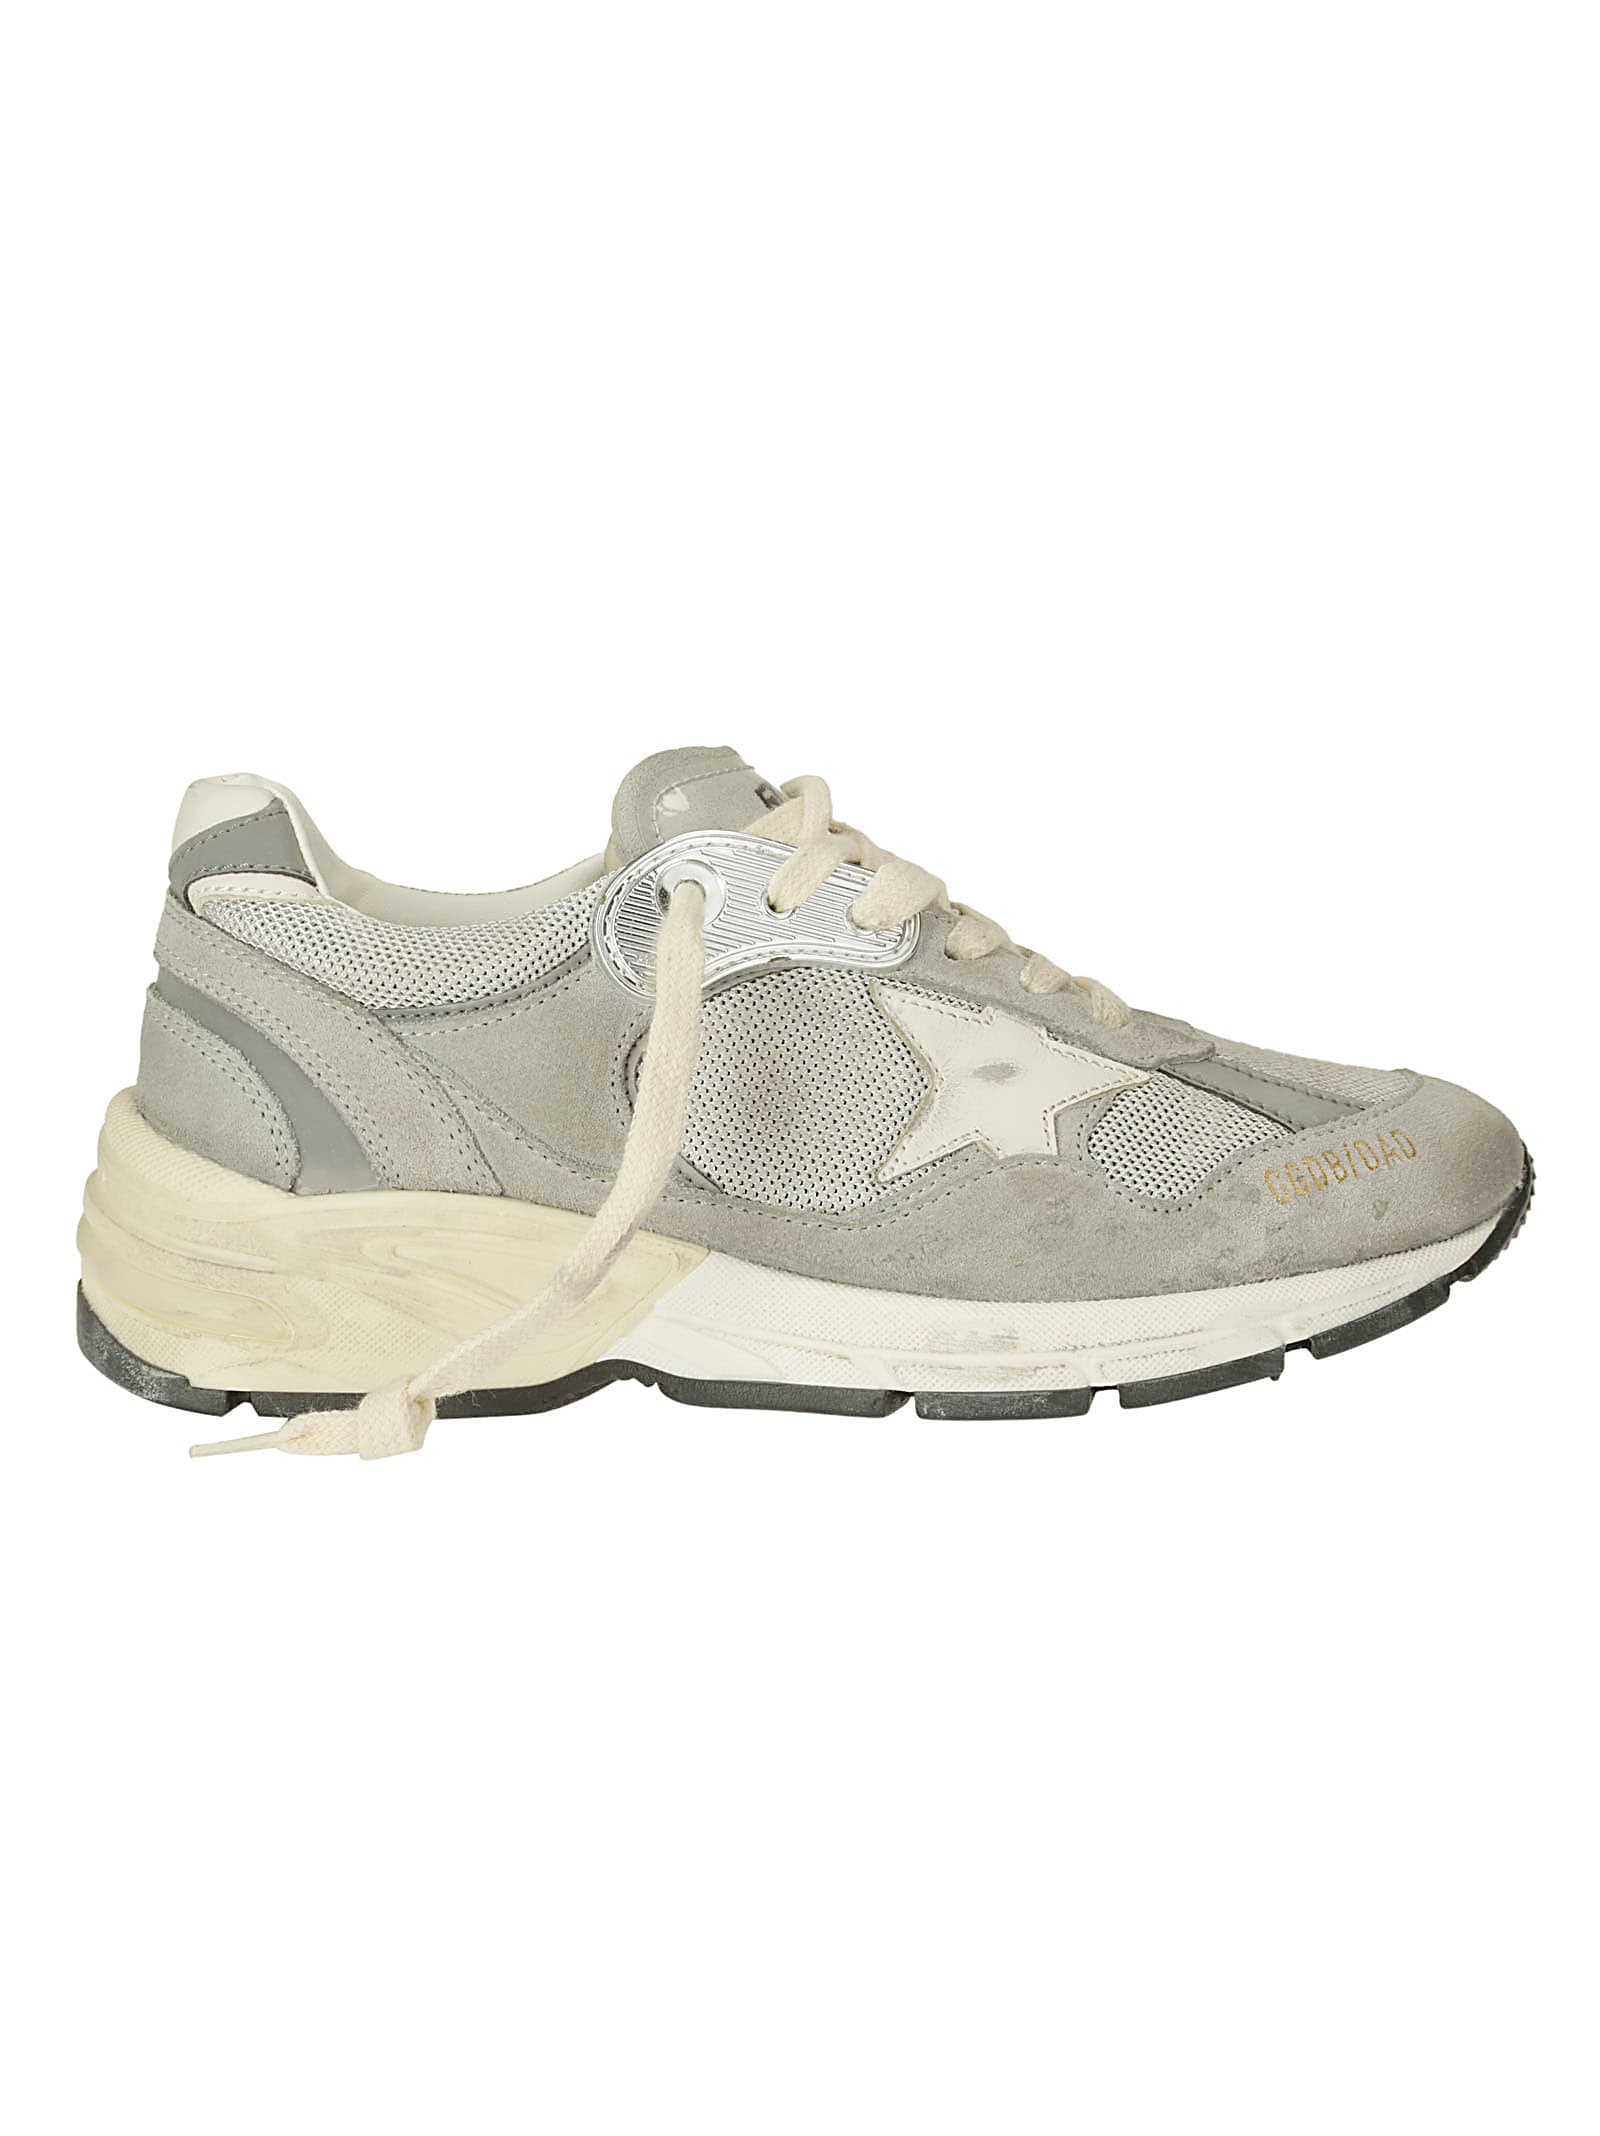 Golden Goose Running Dad Net Upper Suede Toe And Spur Leather S In Grey/silver/white